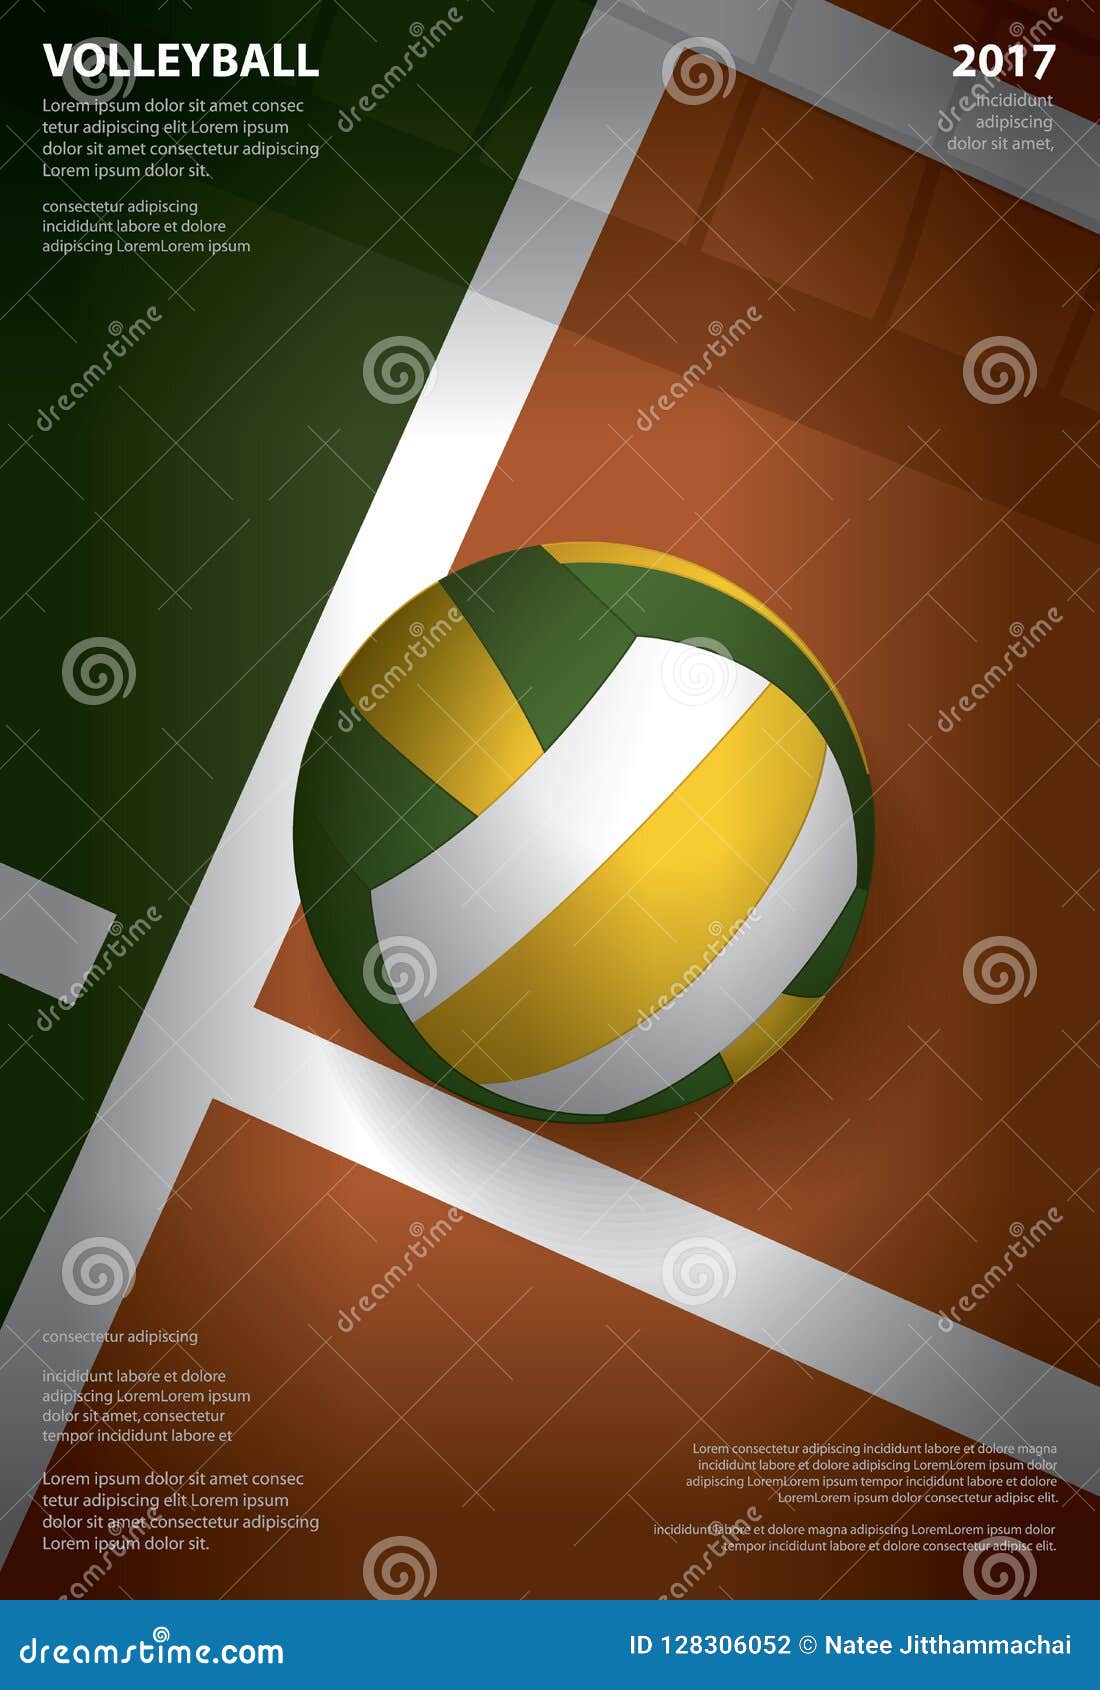 Volleyball Tournament Poster Template Design Stock Vector ...